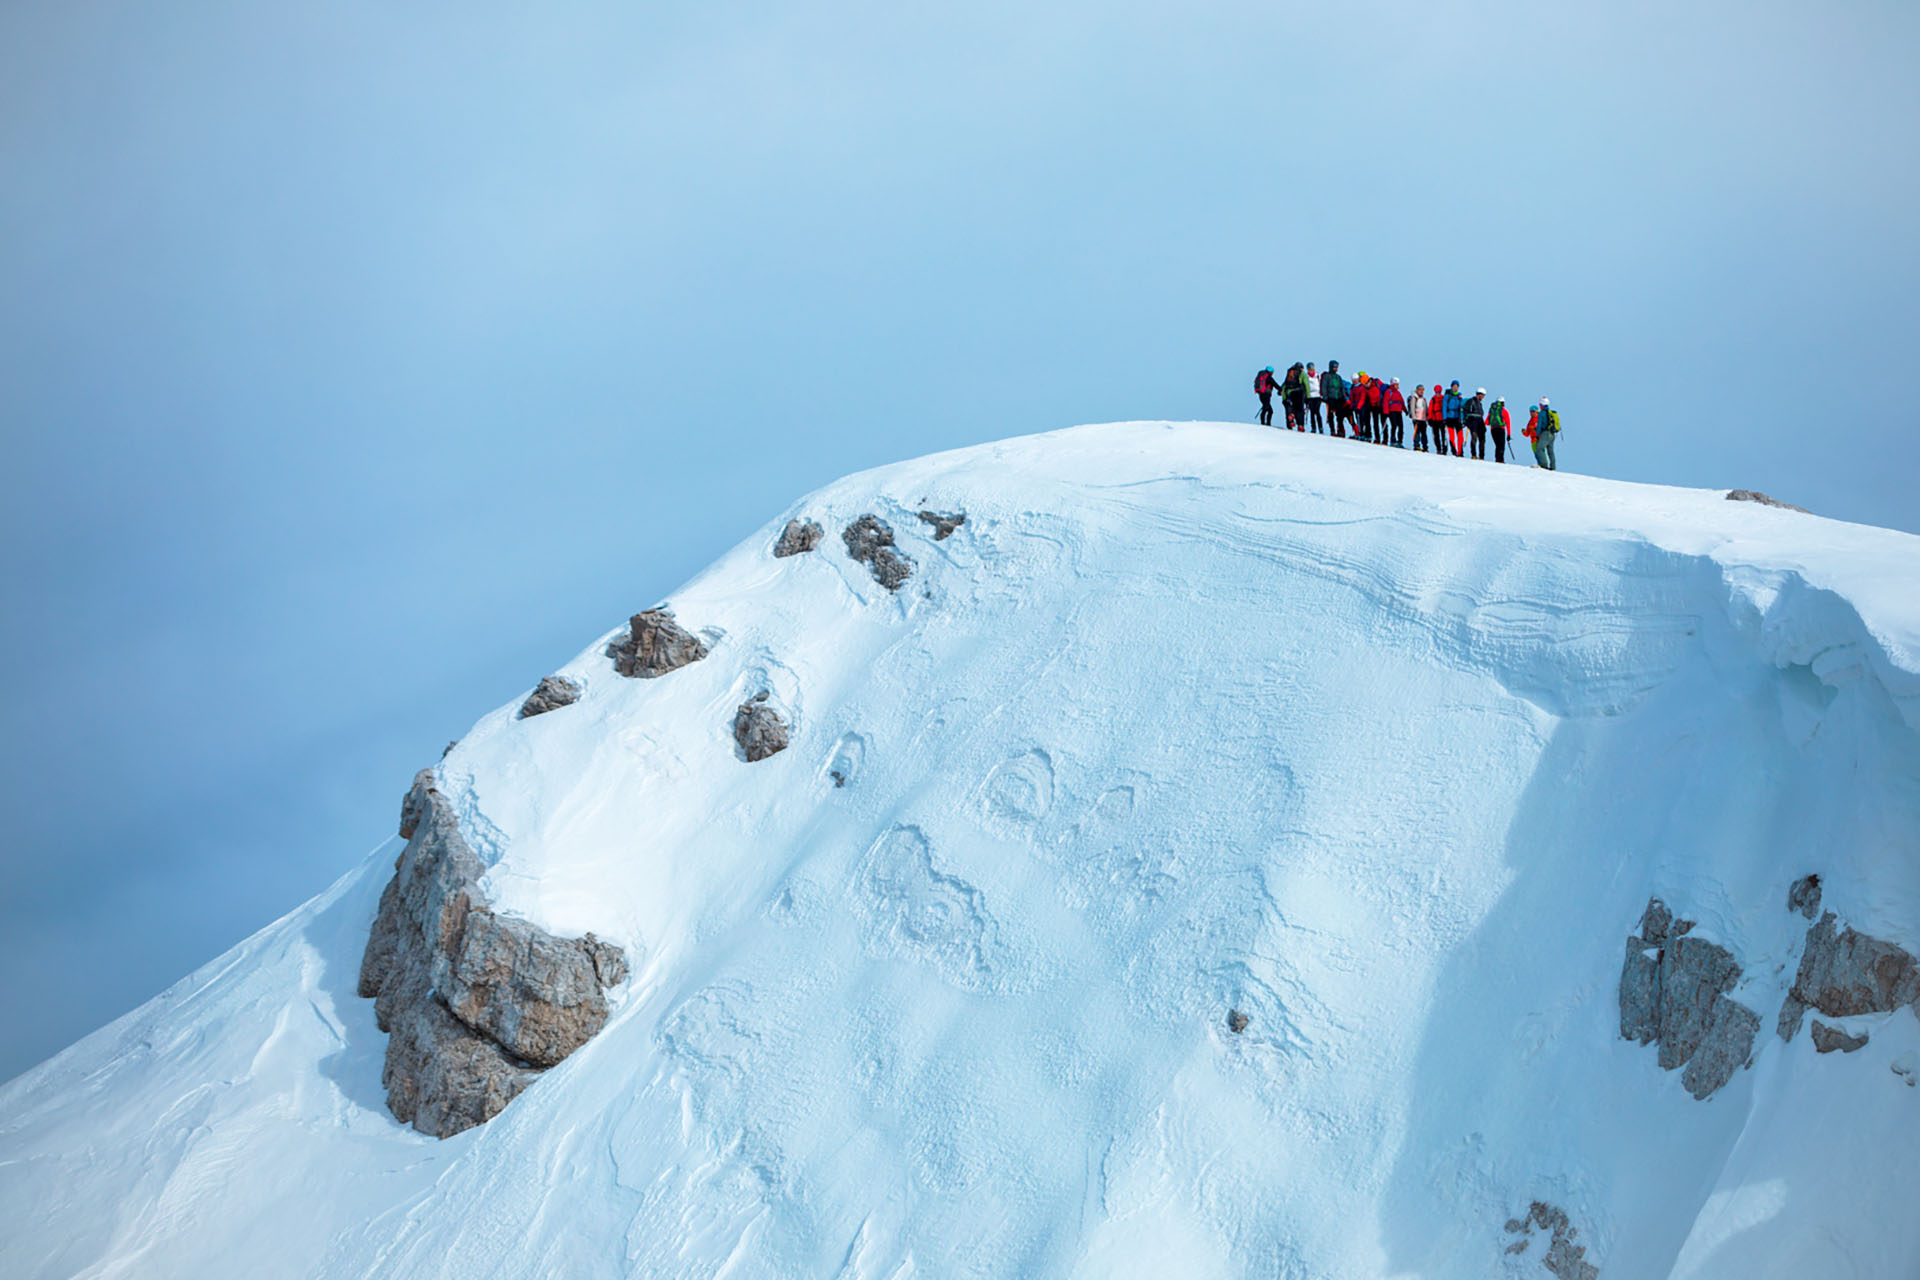 Guided winter tour in mountaineering course with IFMGA guides